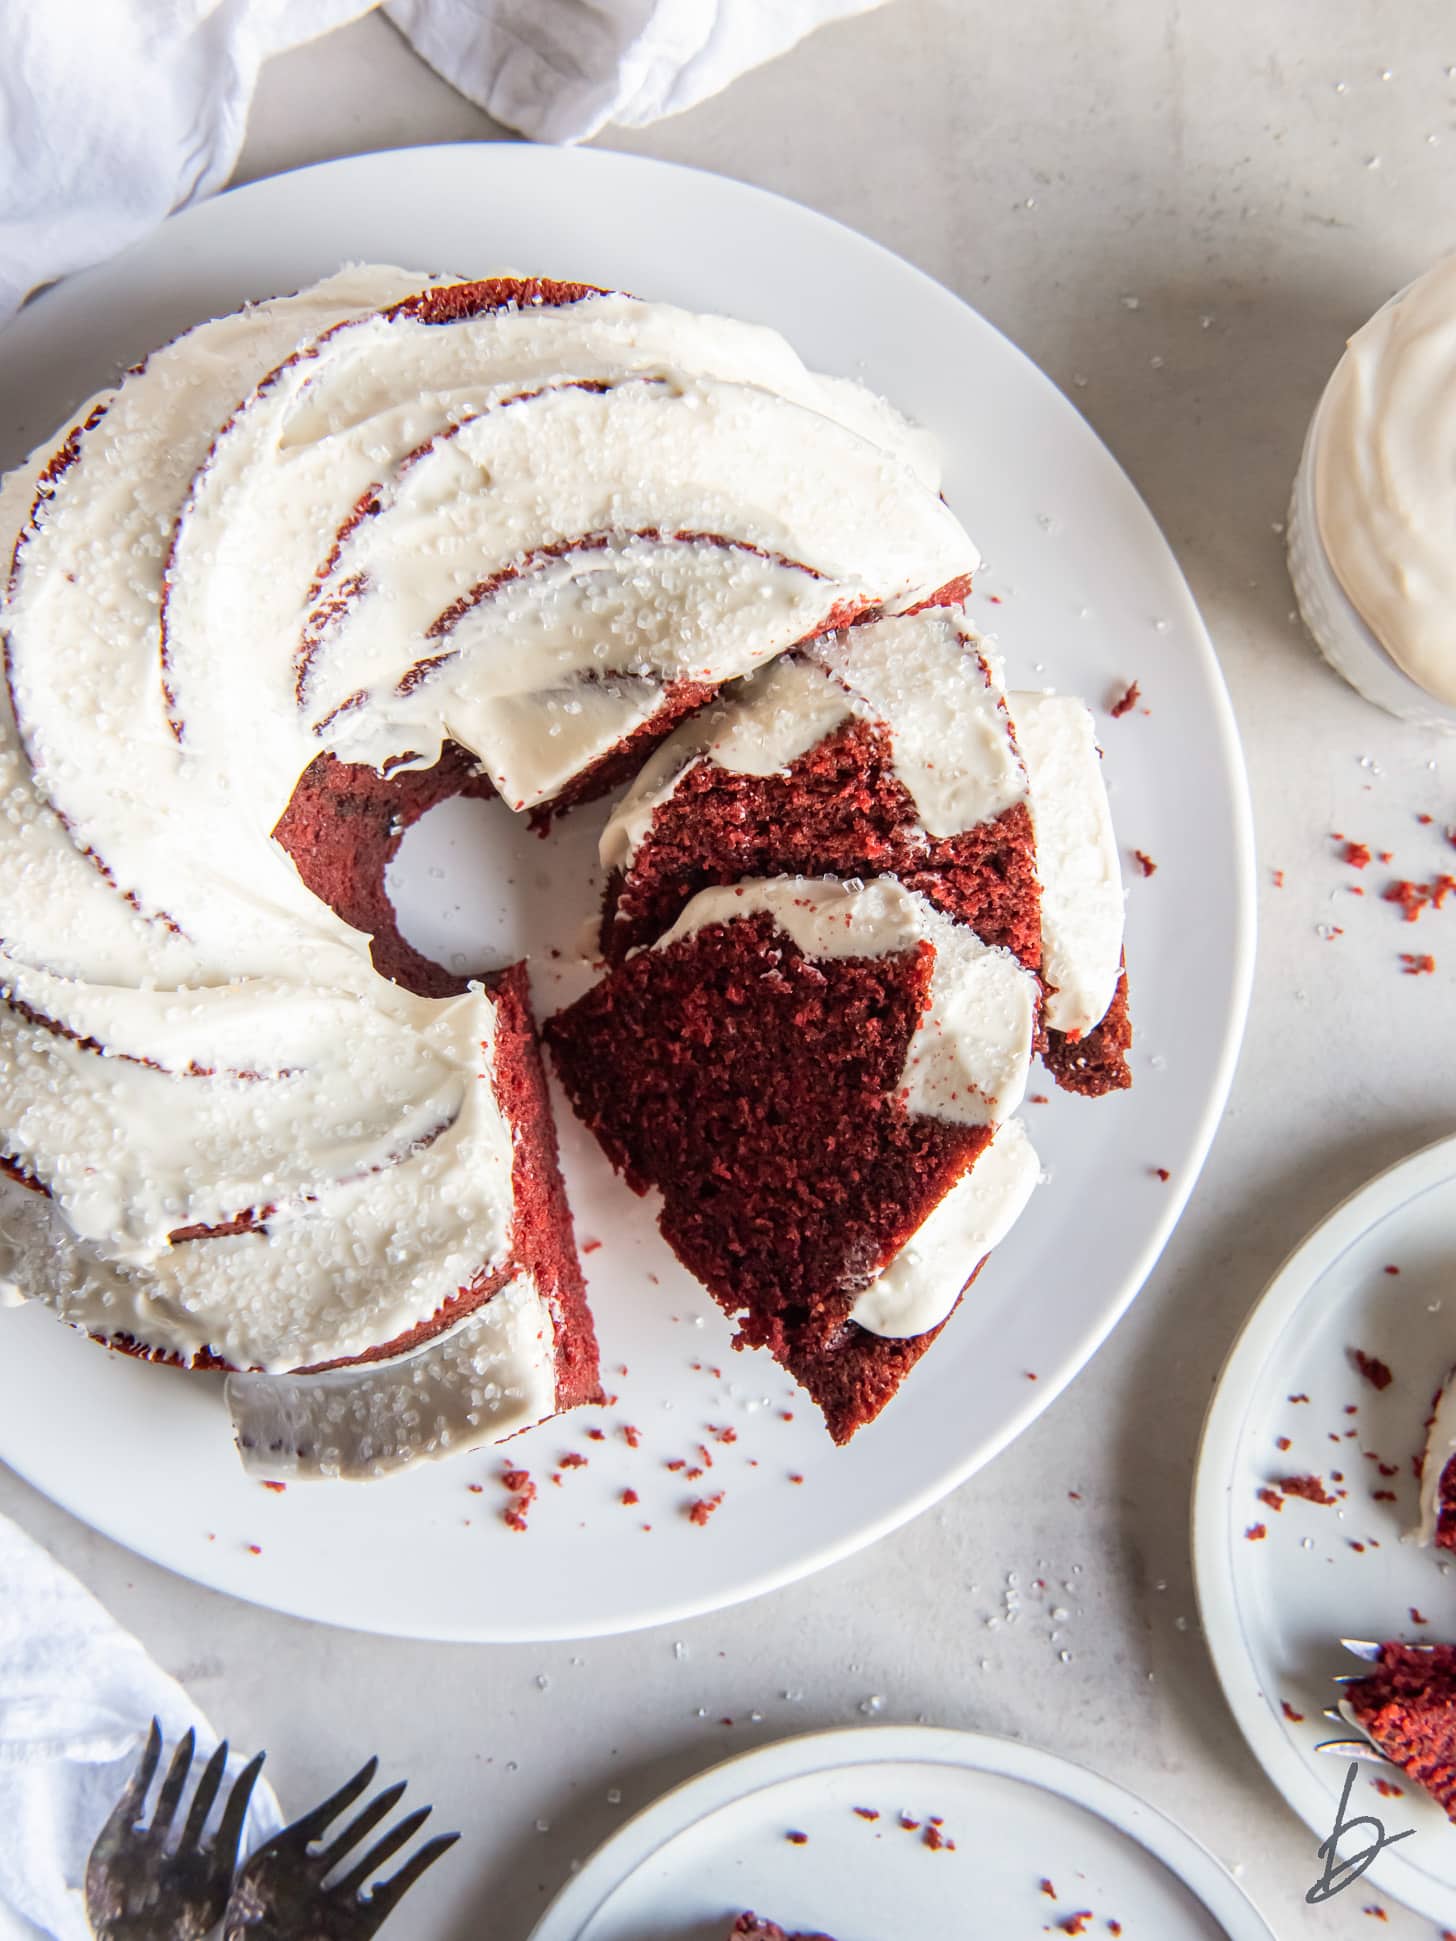 red velvet bundt cake with cream cheese frosting on plate with two slices cut.